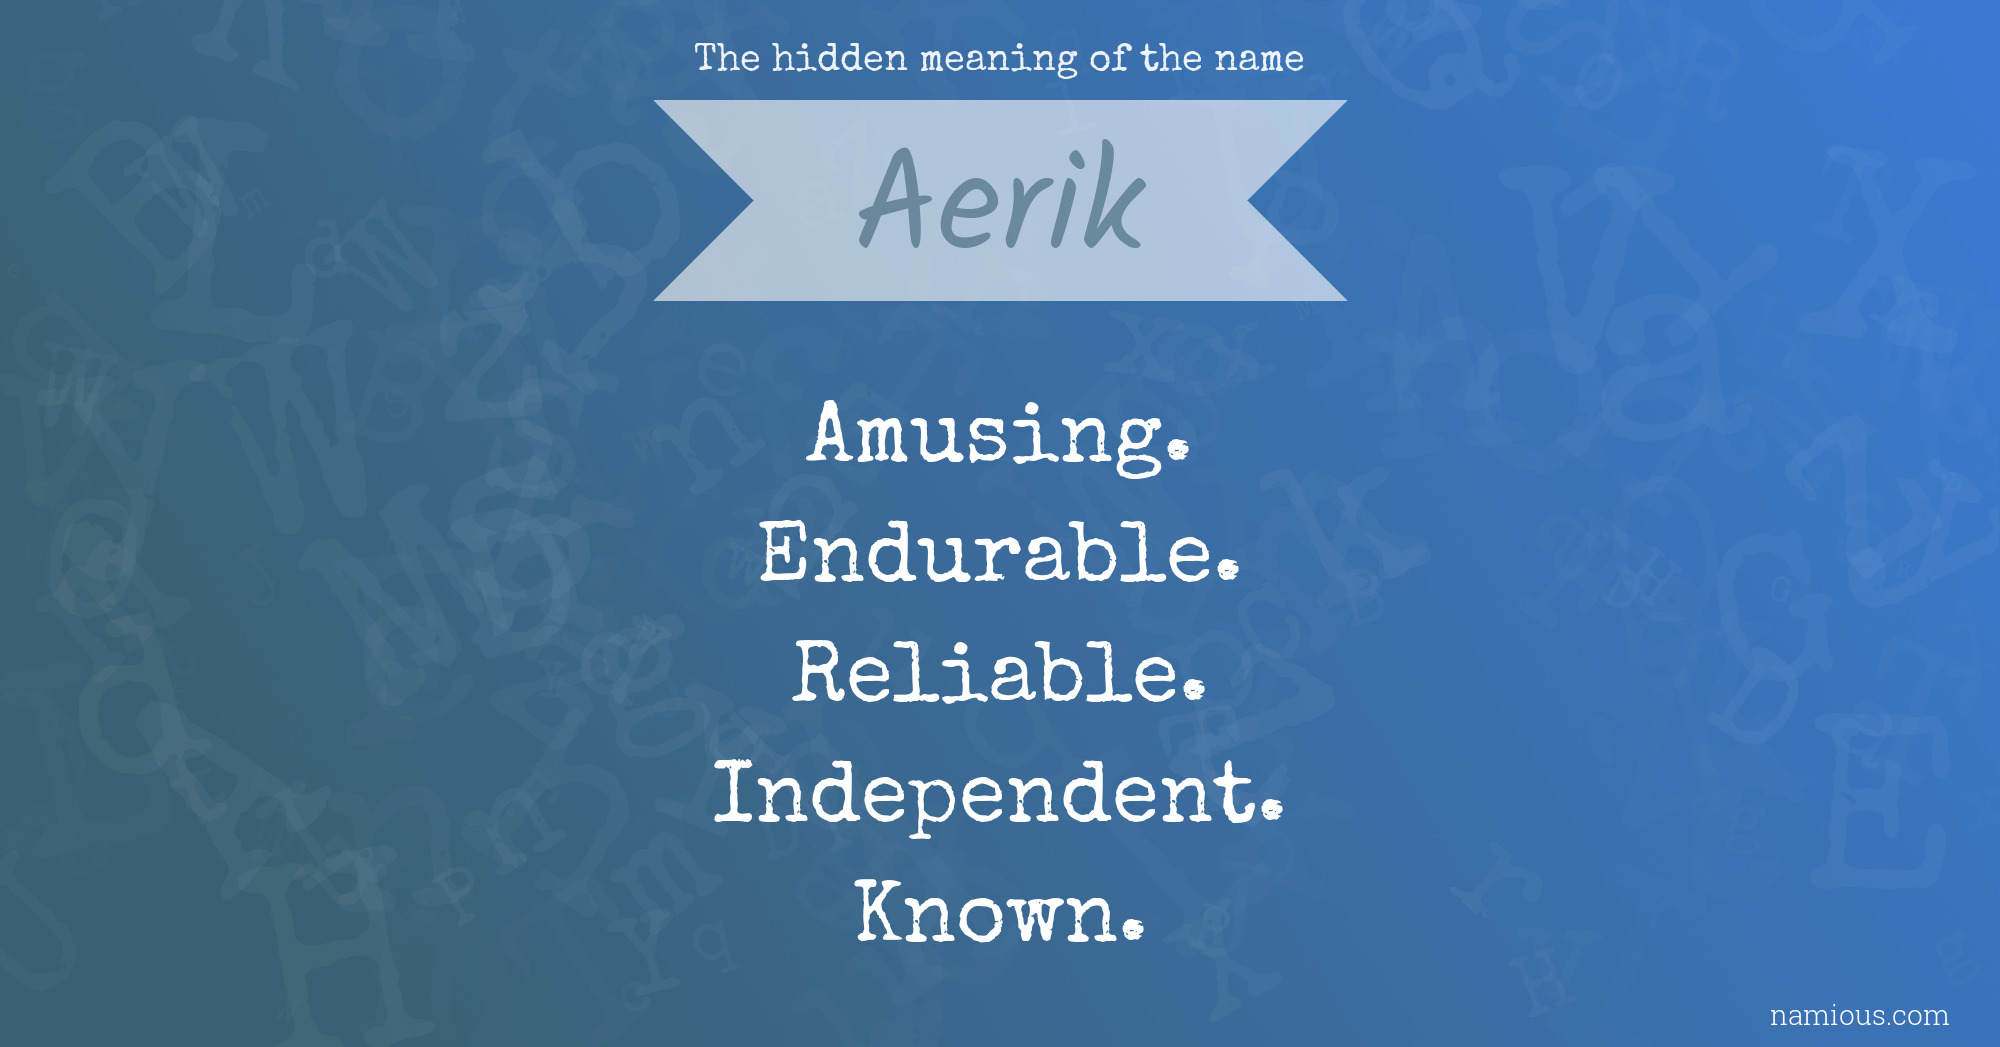 The hidden meaning of the name Aerik